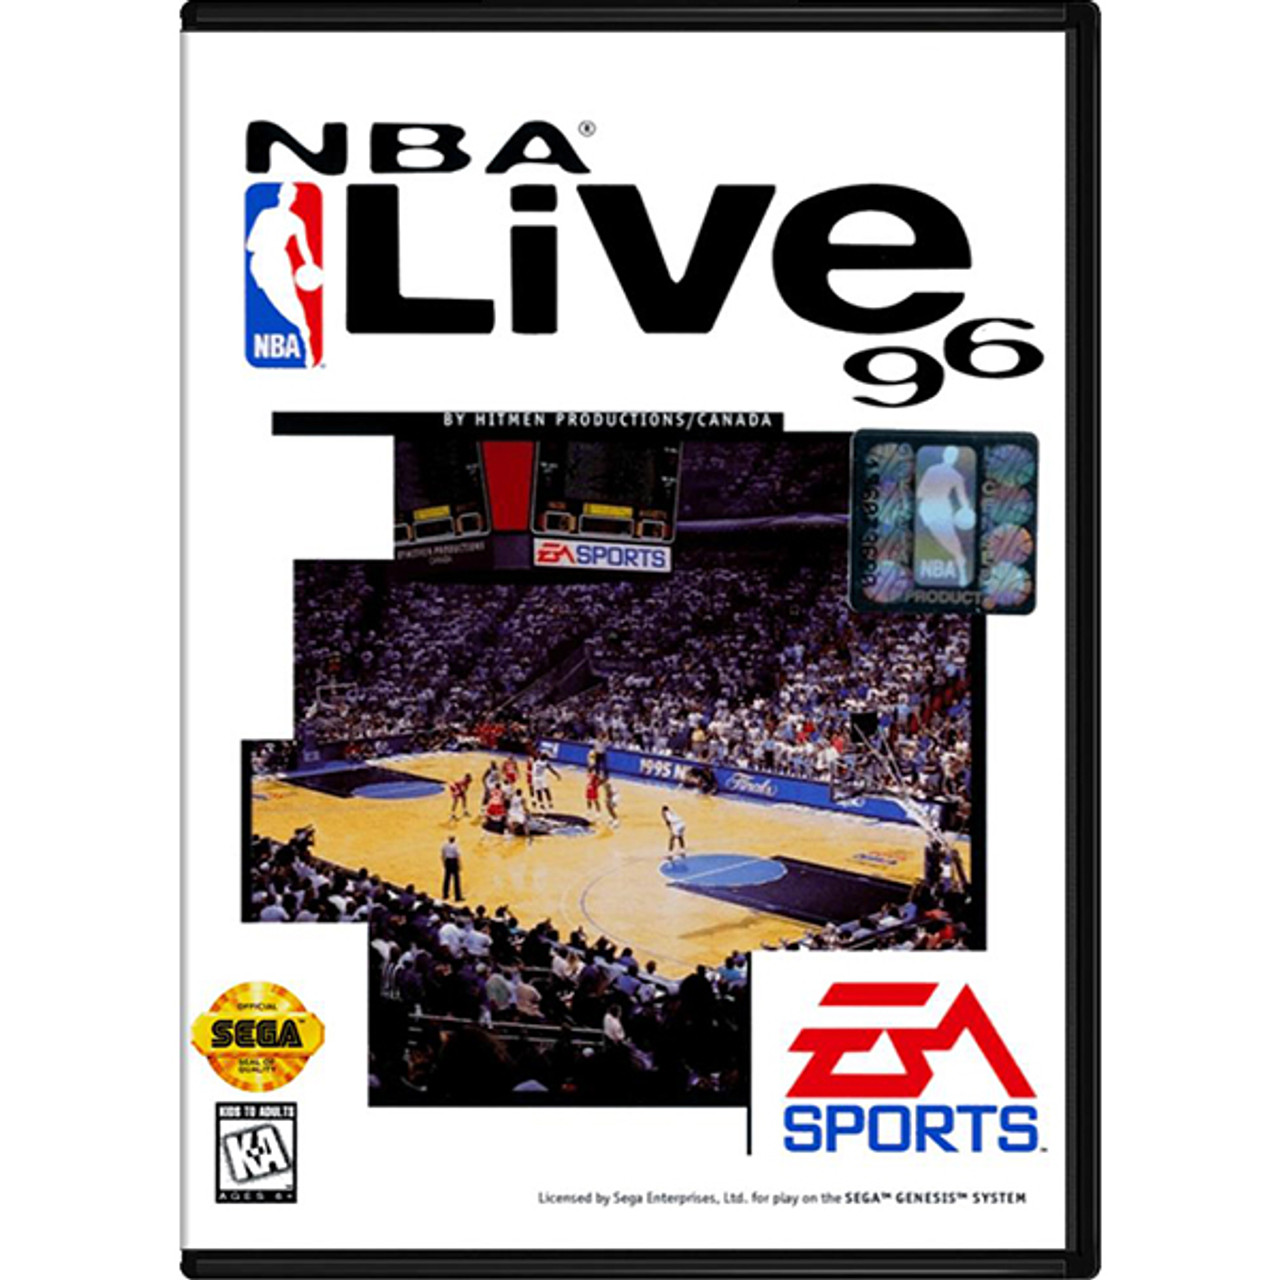 NBA Live 96 Genesis Complete Game For Sale DKOldies